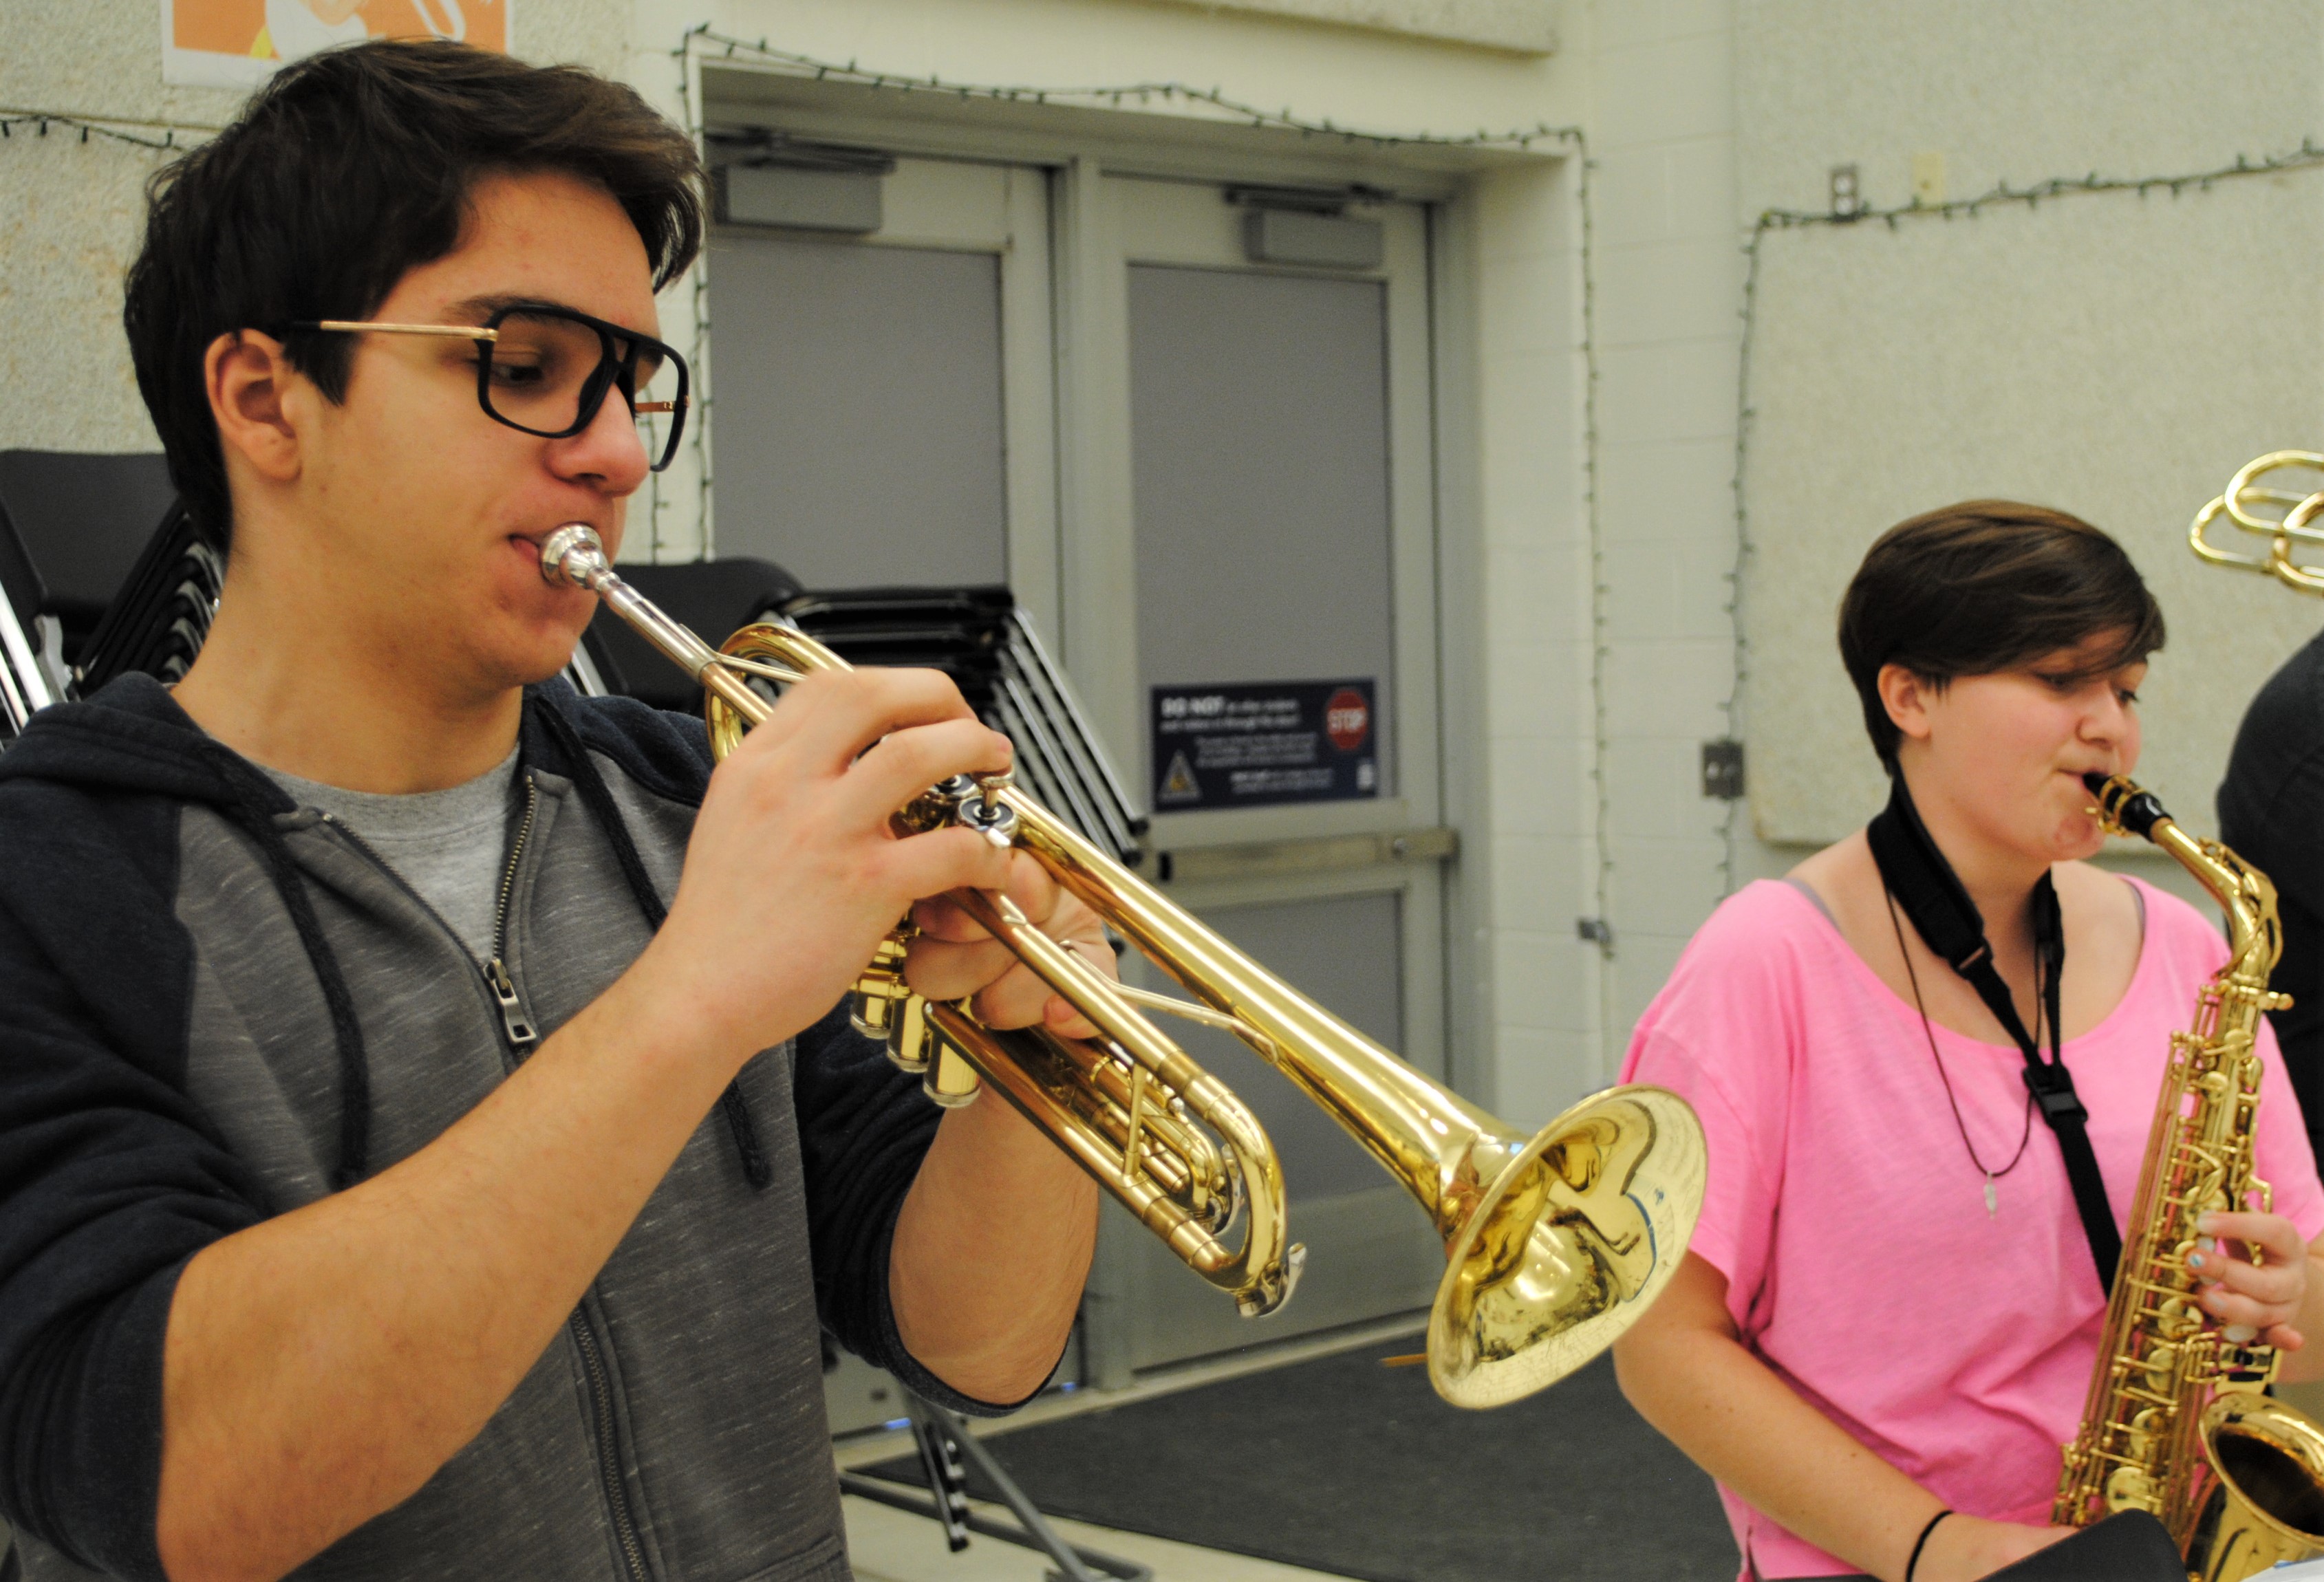 Oxford High School senior Gio Paese and junior Jane Tucker on the trumpet and saxophone in preparation for their big concert. Photo by Shelby Tankersley.